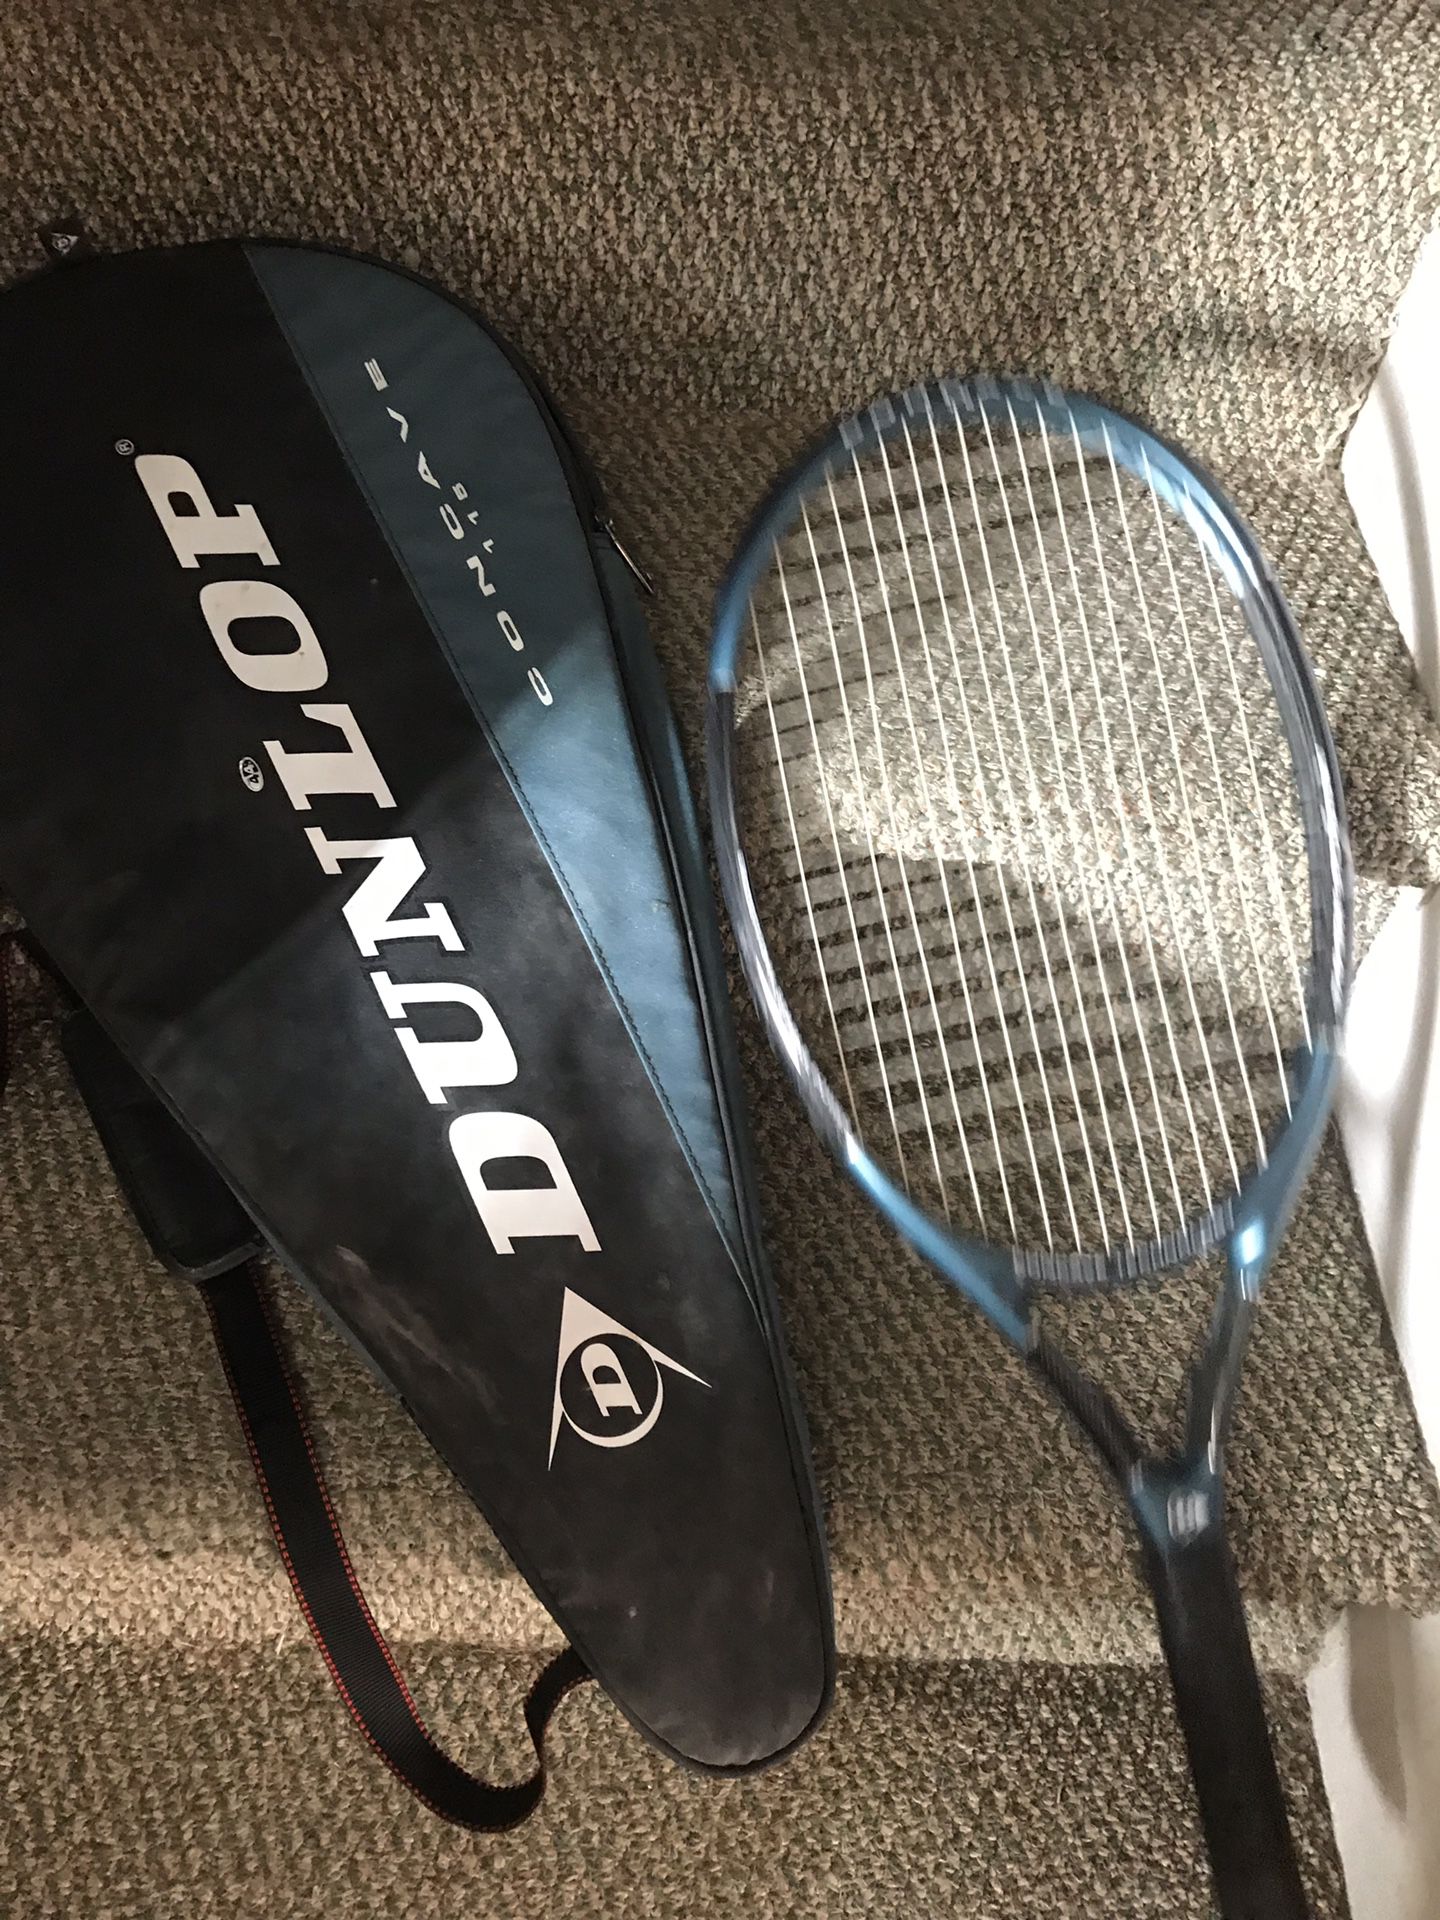 Tennis racket and case